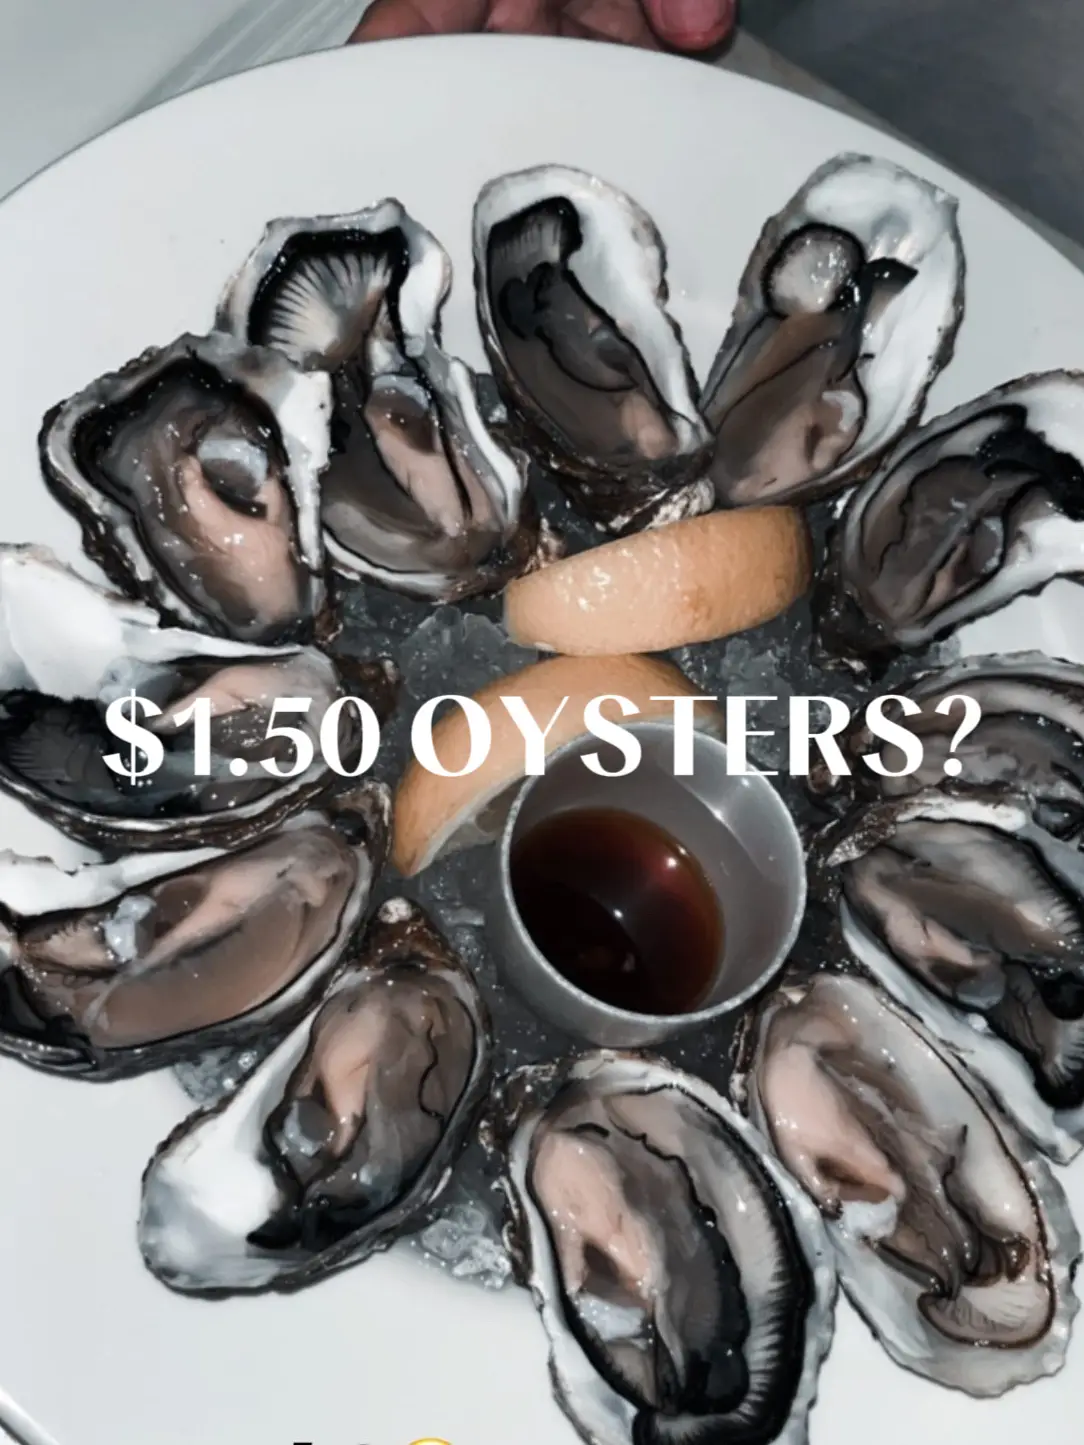 $1.50 OYSTERS AND 1 FOR 1 COCKTAILS?'s images(0)